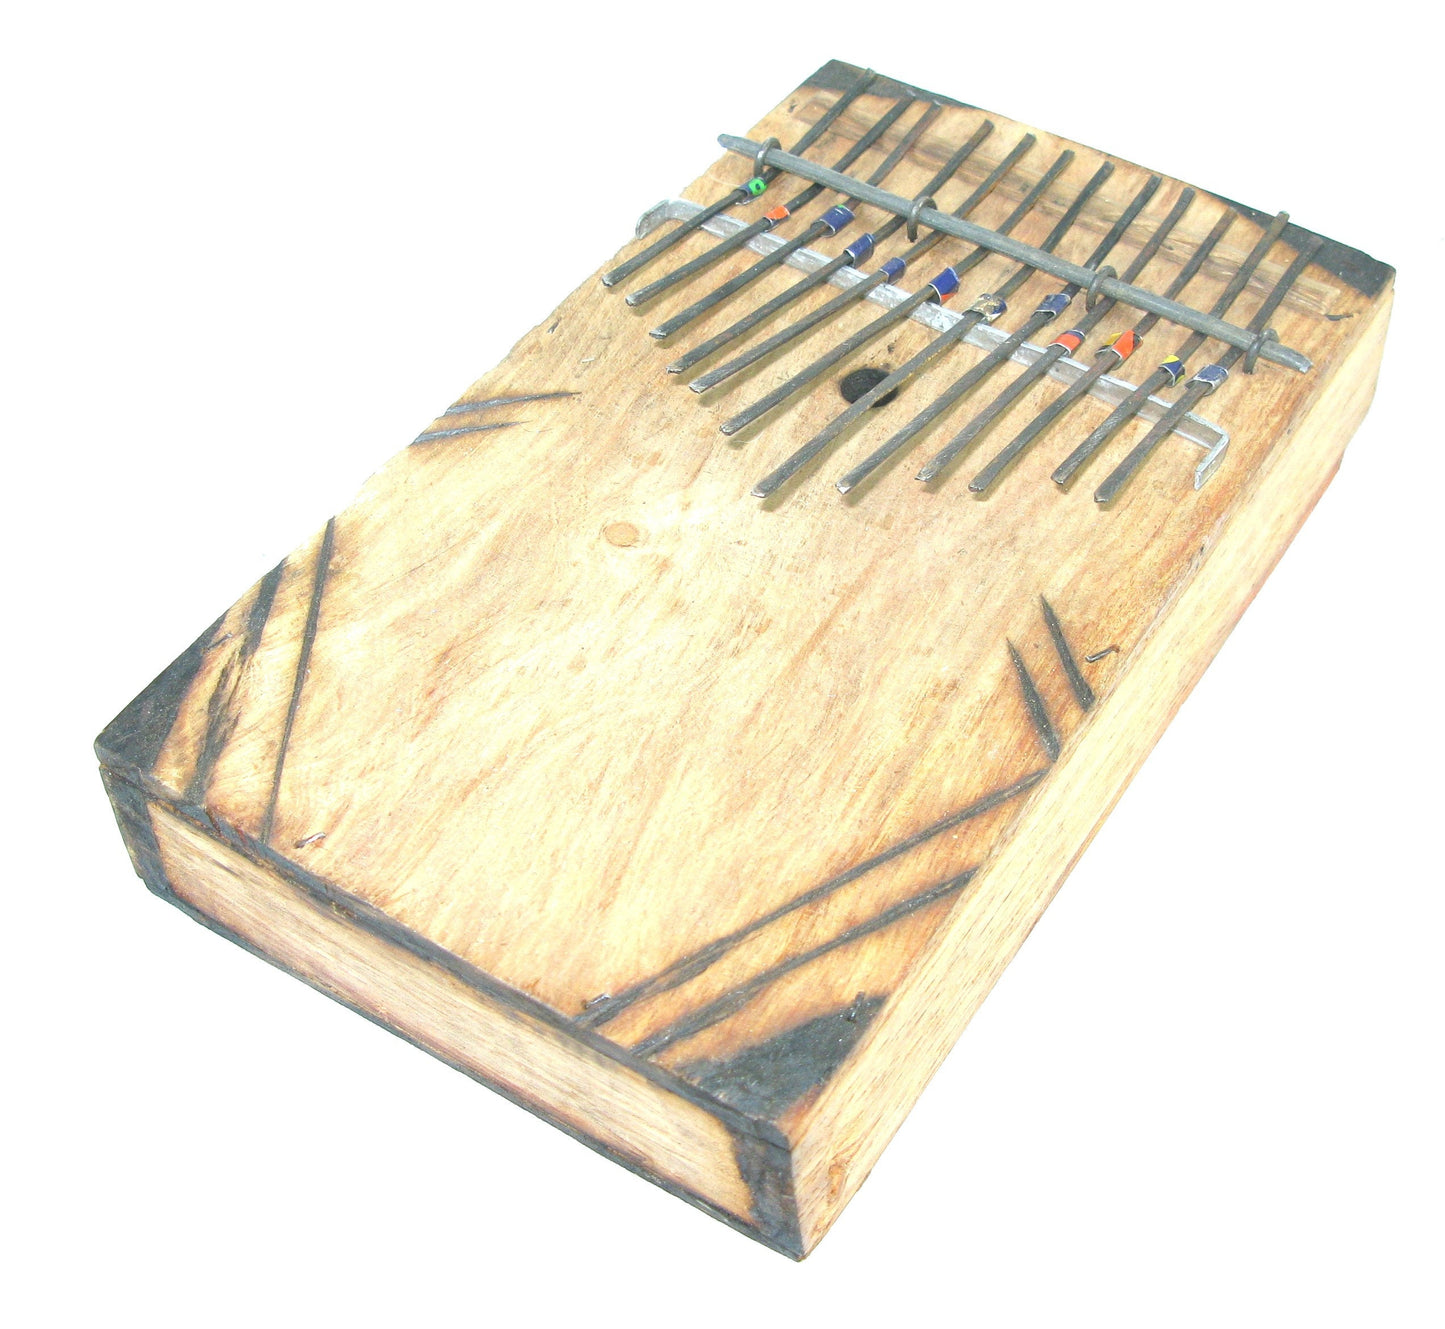 Fair Trade African 12 Note Thumb Piano Karimba Mbira Kalimba - Hand crafted Tell Stories with Music - with Storycard